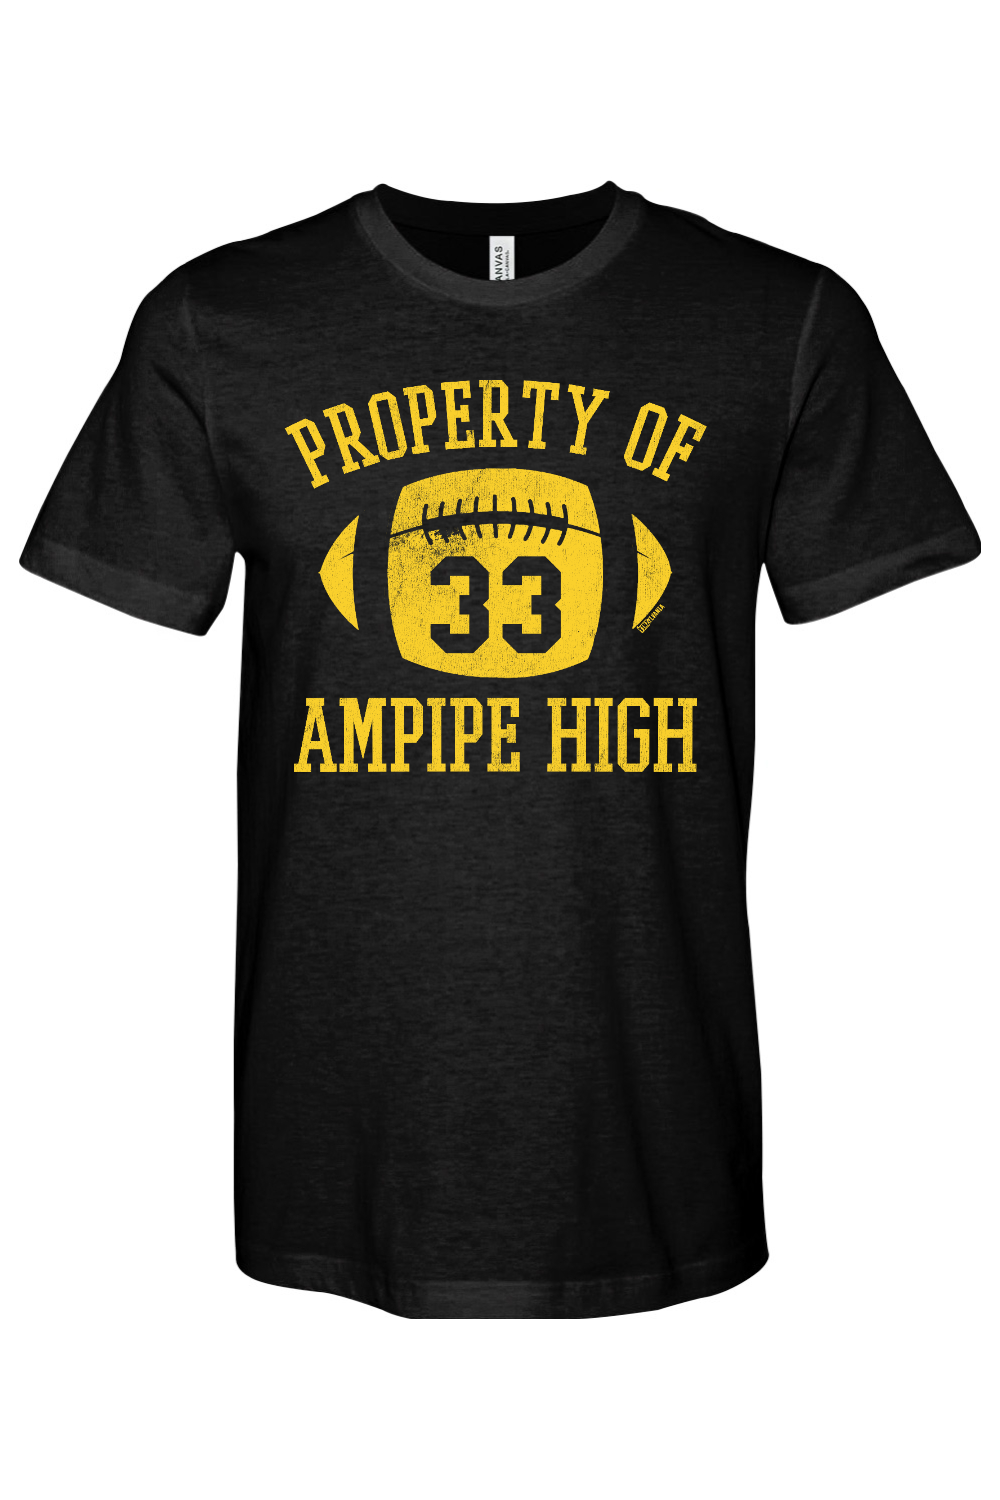 Property of Ampipe High (All the Right Moves) - Yinzylvania